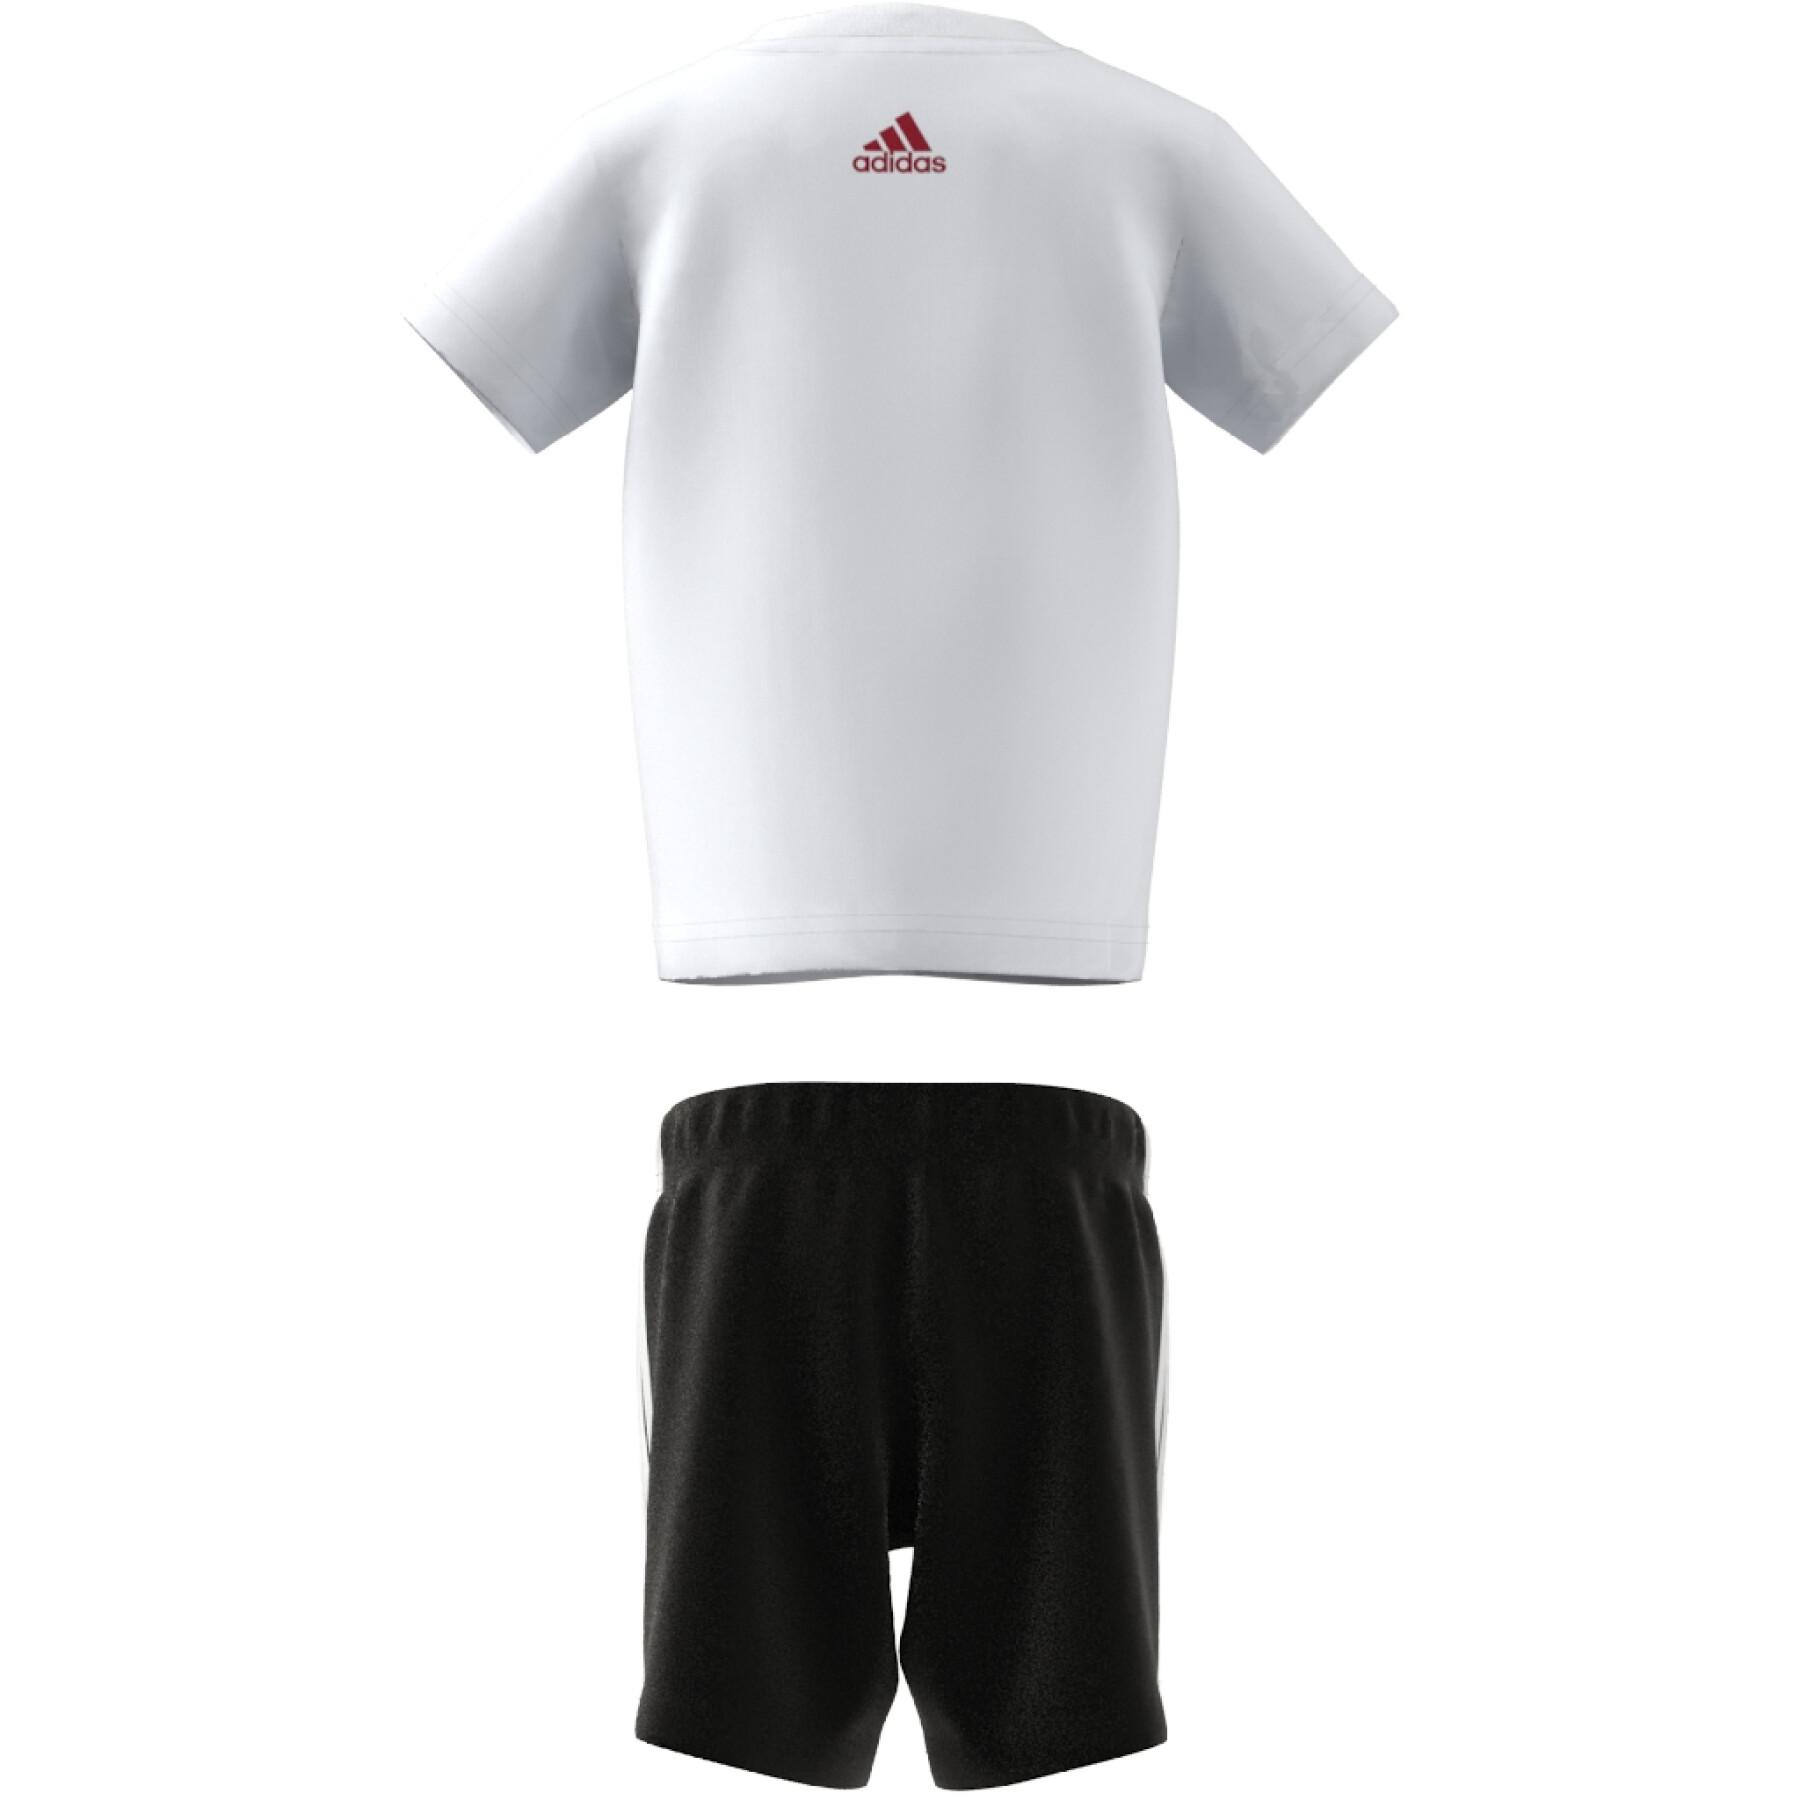 adidas and adidas Organic - Lifestyle 3-Stripes set Essentials Lineage - Brands cotton t-shirt - shorts